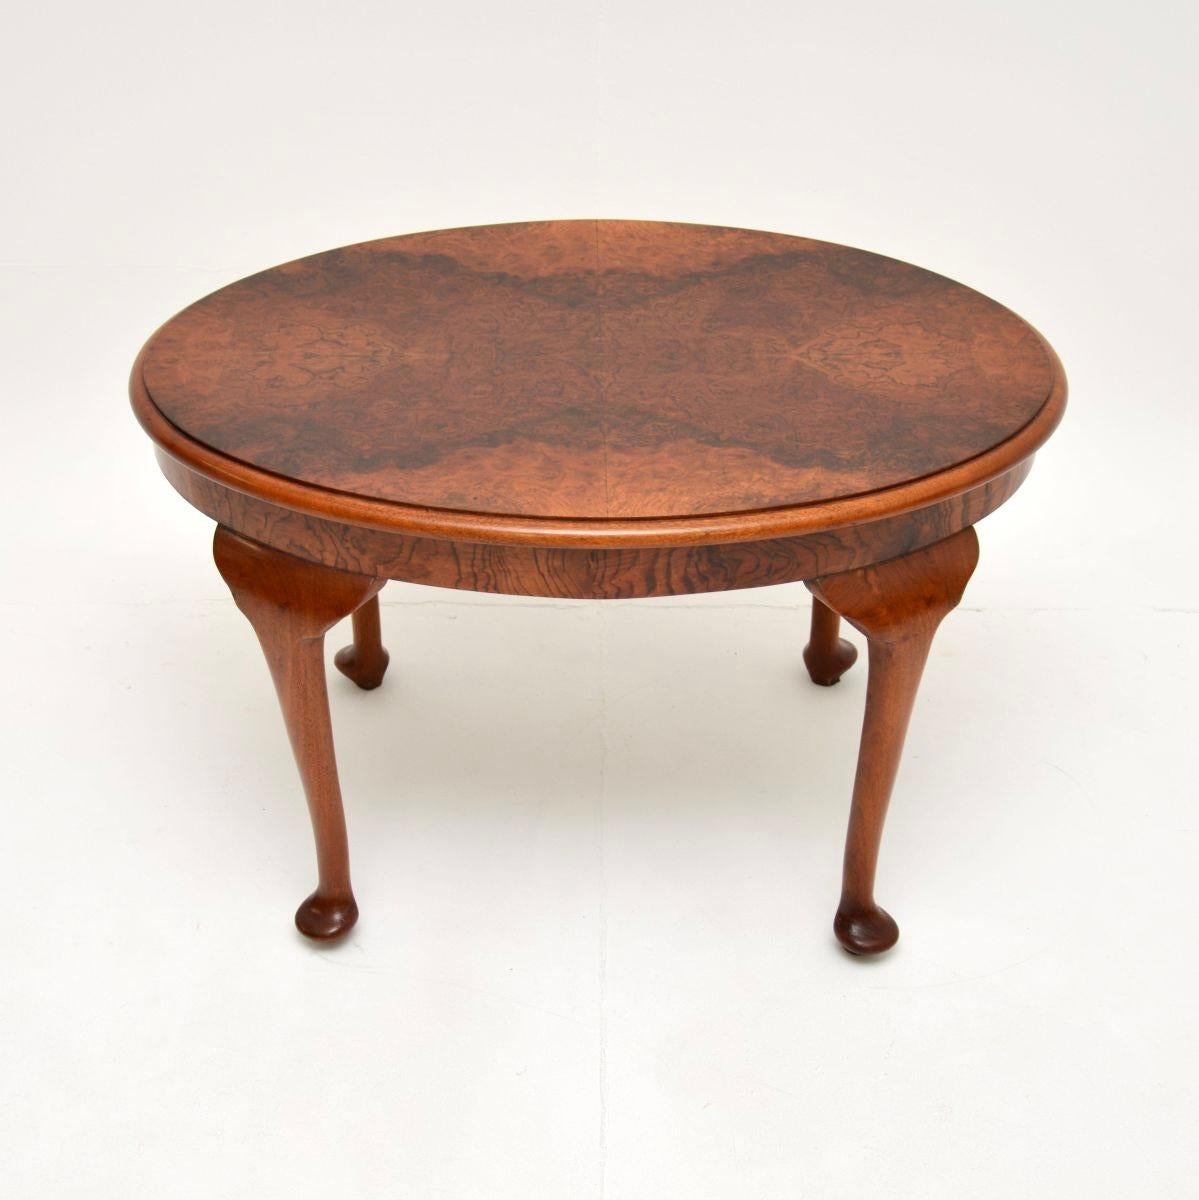 A smart and very well made antique Edwardian burr walnut coffee table. Thus was made in England, it dates from around the 1900-1920 period.

It is of lovely quality, the oval top has stunning burr walnut grain patterns and sits on beautiful solid